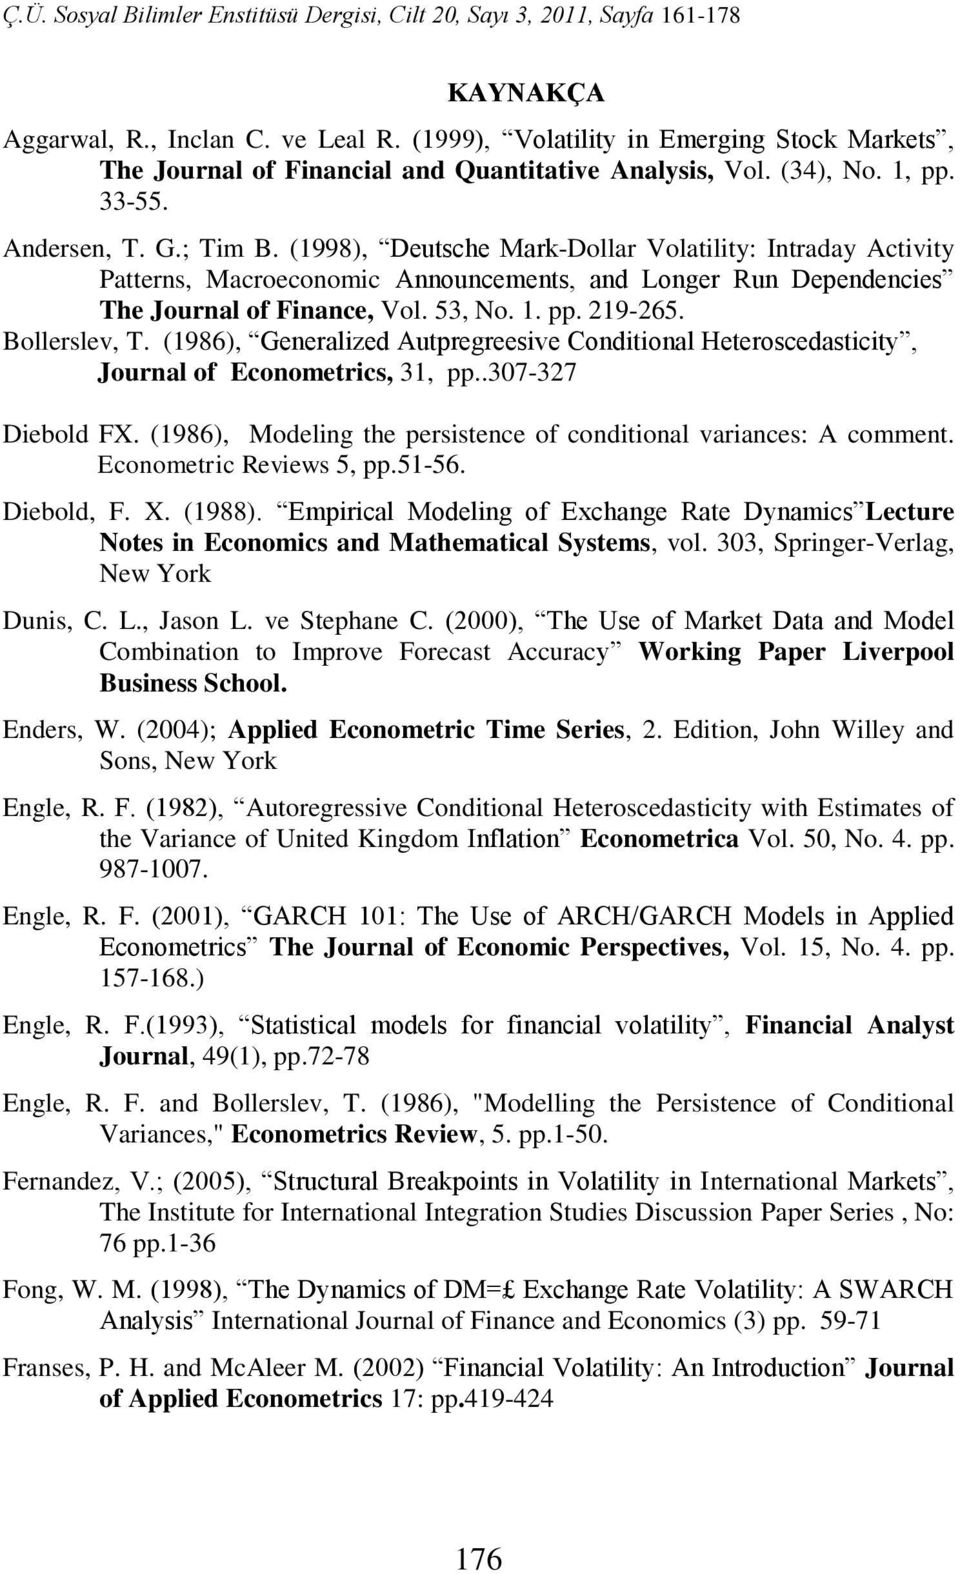 (986), Generalized Aupregreesive Condiional Heeroscedasiciy, Journal of Economerics, 3, pp..307-37 Diebold FX. (986), Modeling he persisence of condiional variances: A commen.